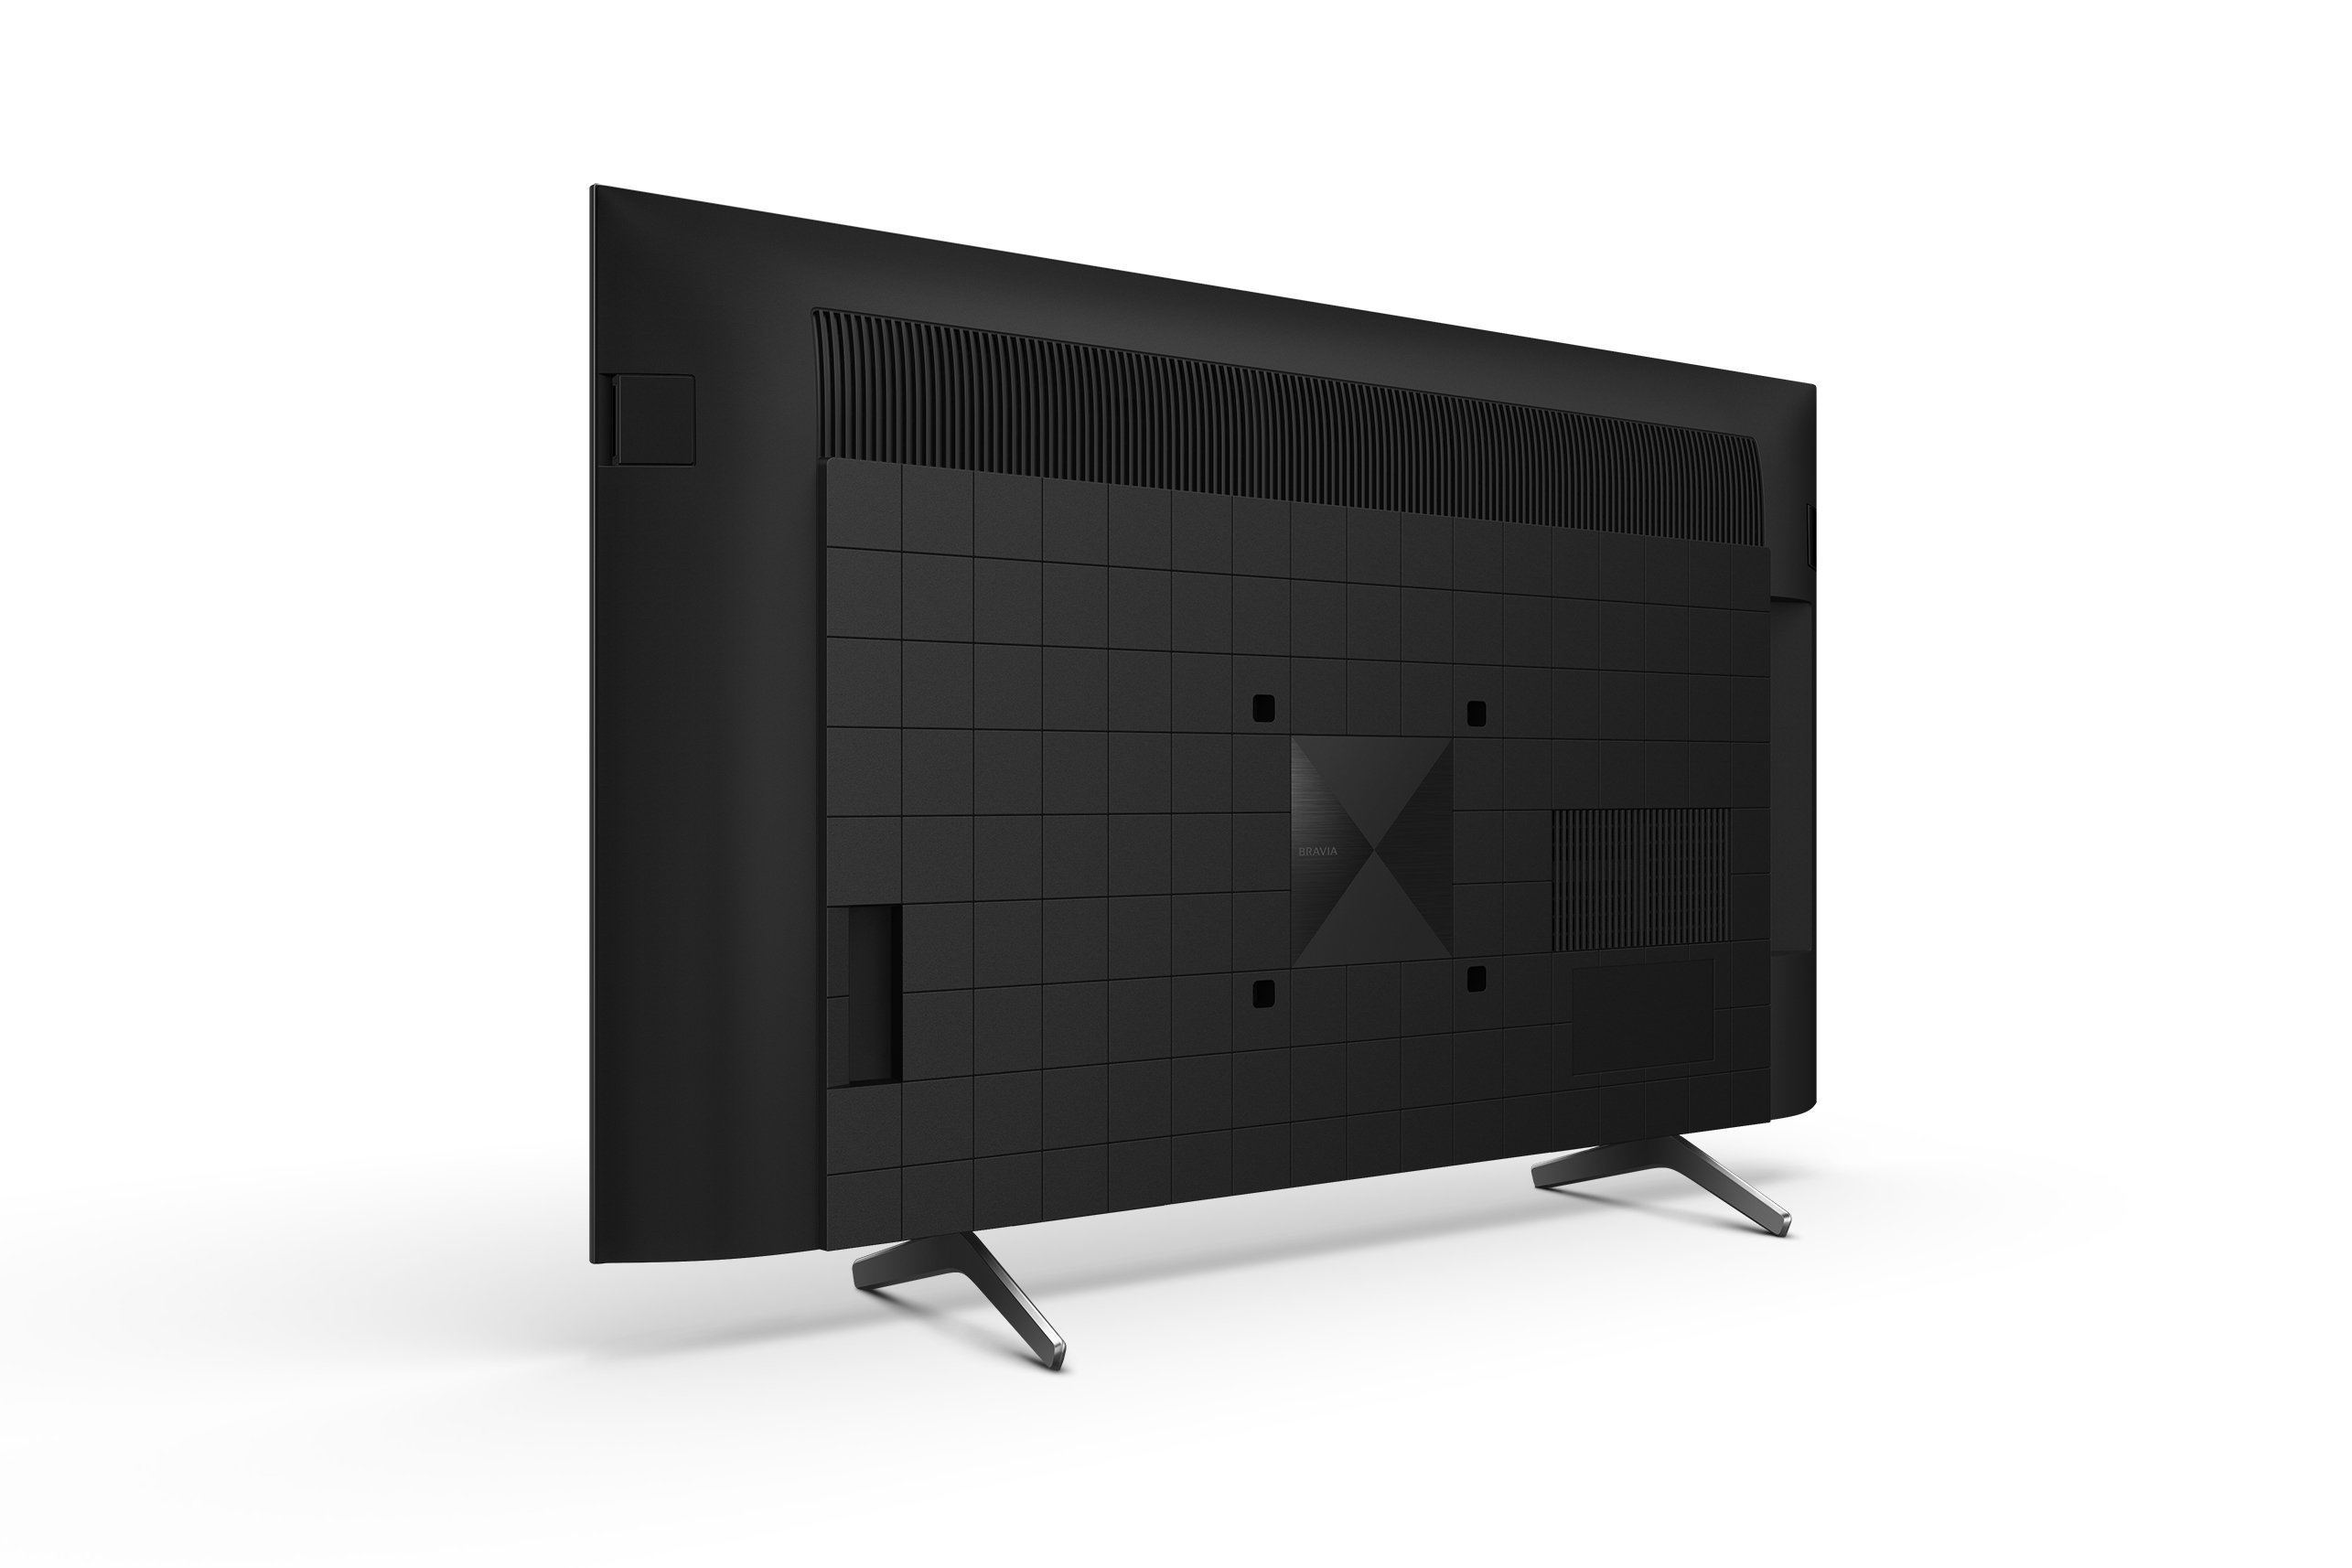 Sony 50" Class XR50X90J BRAVIA XR Full Array LED 4K Ultra HD Smart Google TV with Dolby Vision HDR X90J Series 2021 model - image 3 of 4